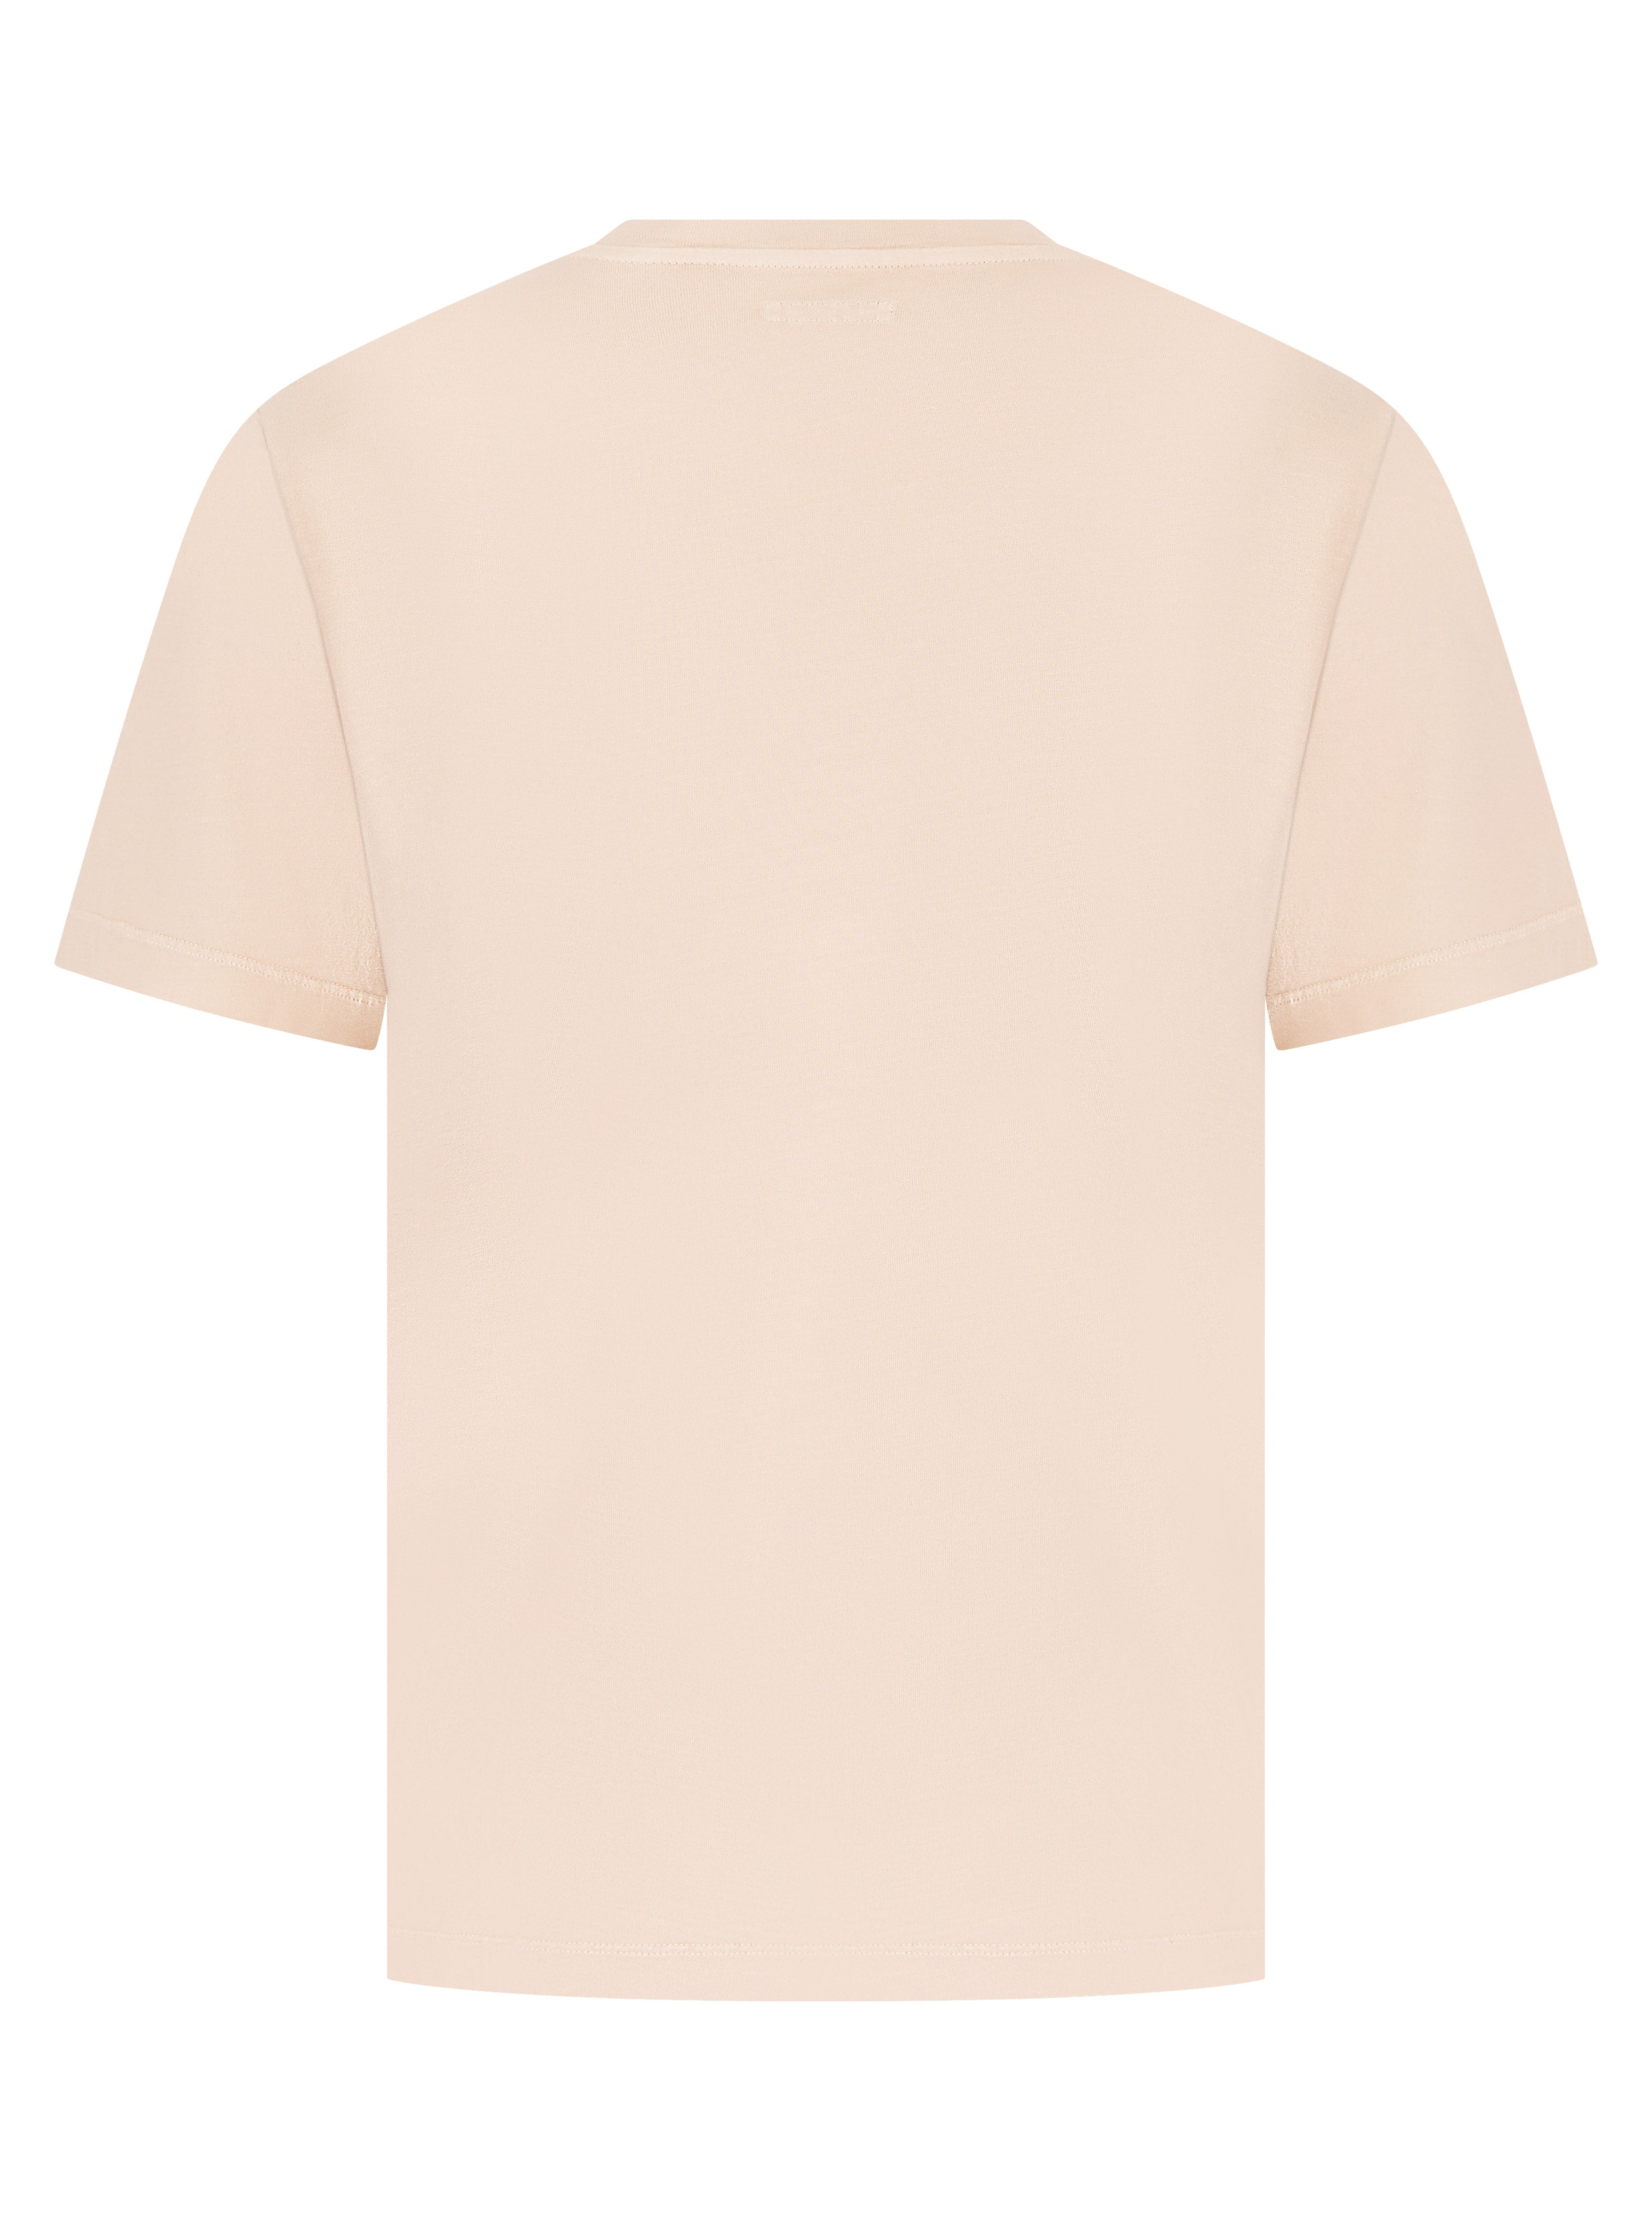 Load image into Gallery viewer, Jacob Cohen Chest Logo Tee Coral
